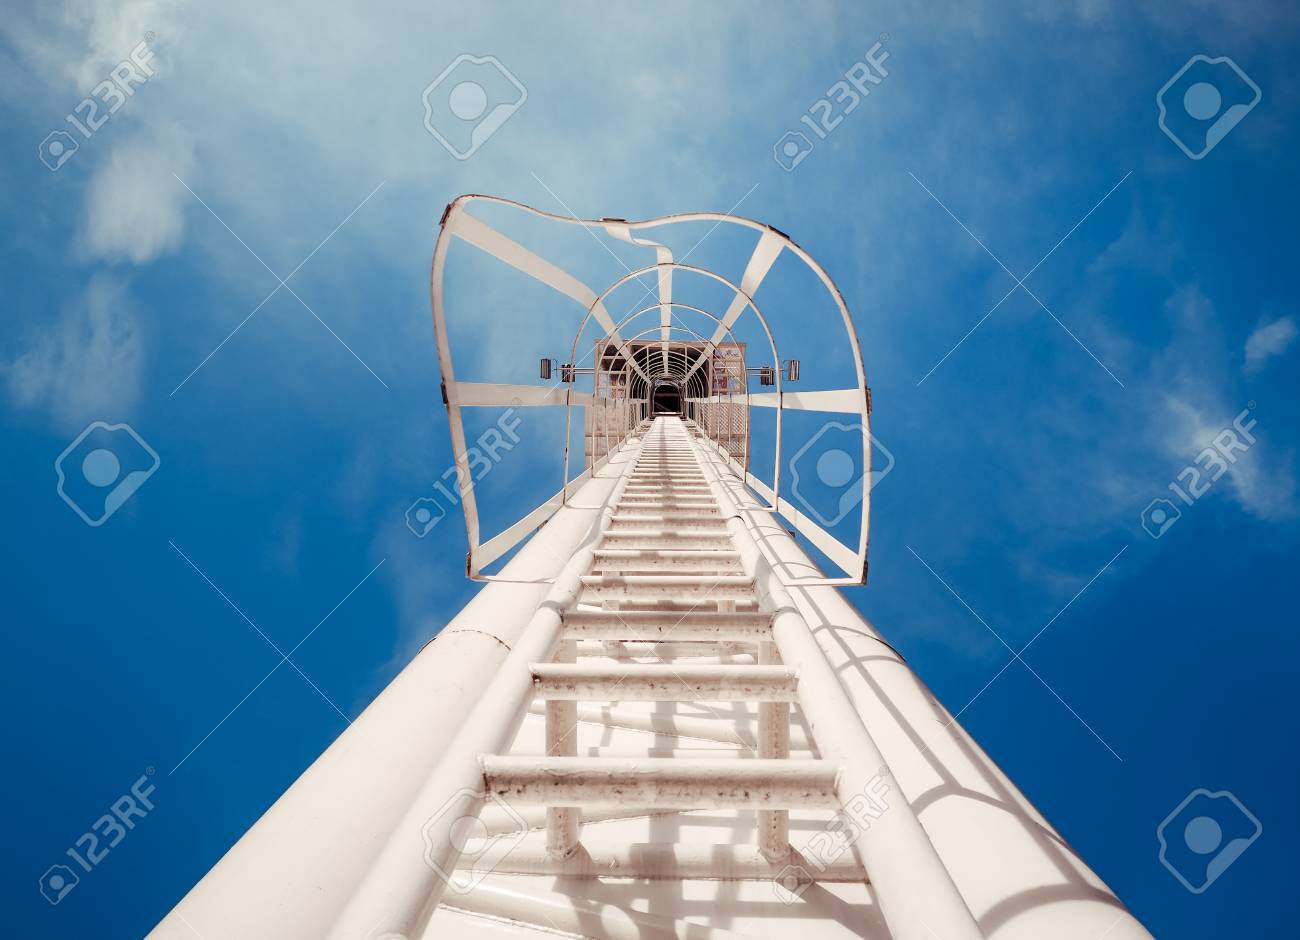 Fixed Ladder To Top Of Building Or Observation Deck With